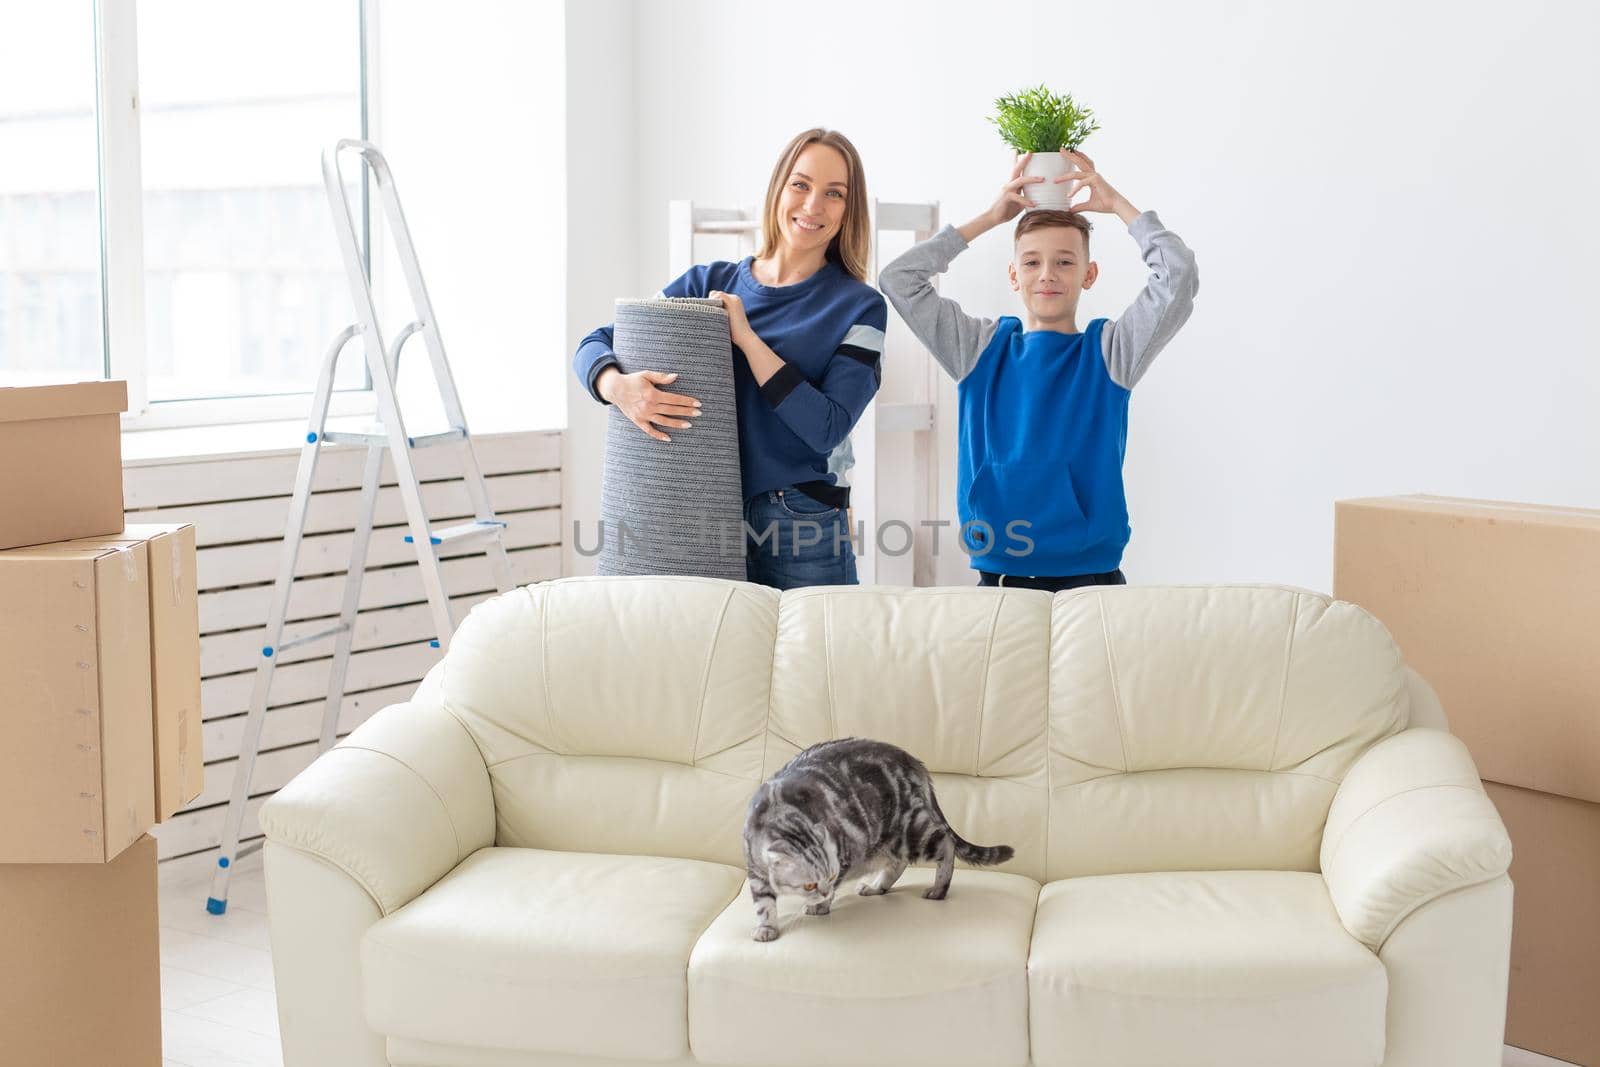 Young cute single mother and son are happy about the move to new house holding a lop-eared scottish cat and a pot of greens in their hands. Concept of housewarming and family space extensions. by Satura86